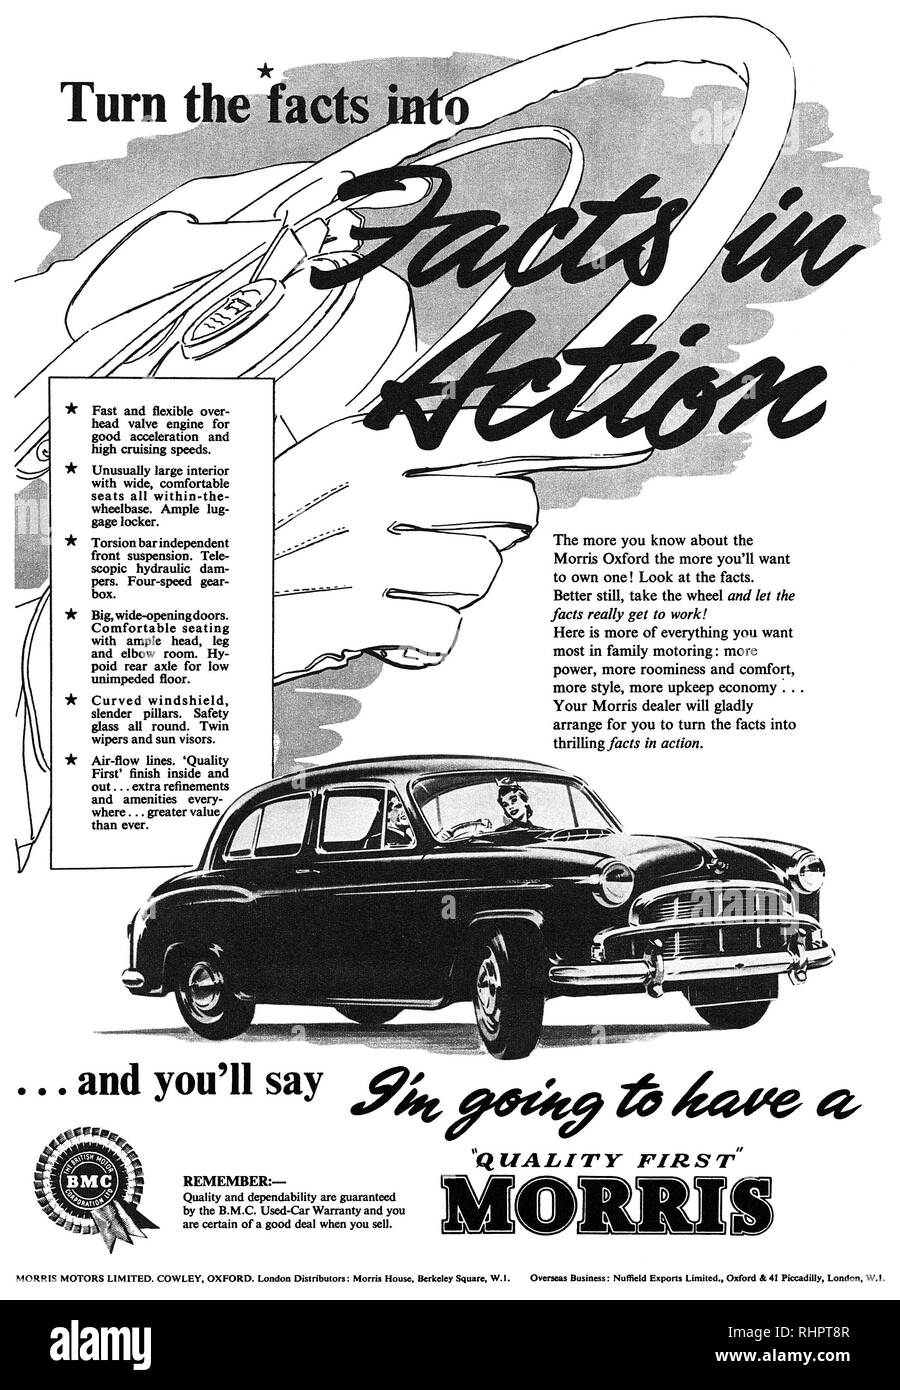 1956 British advertisement for the Morris Oxford motor car. Stock Photo